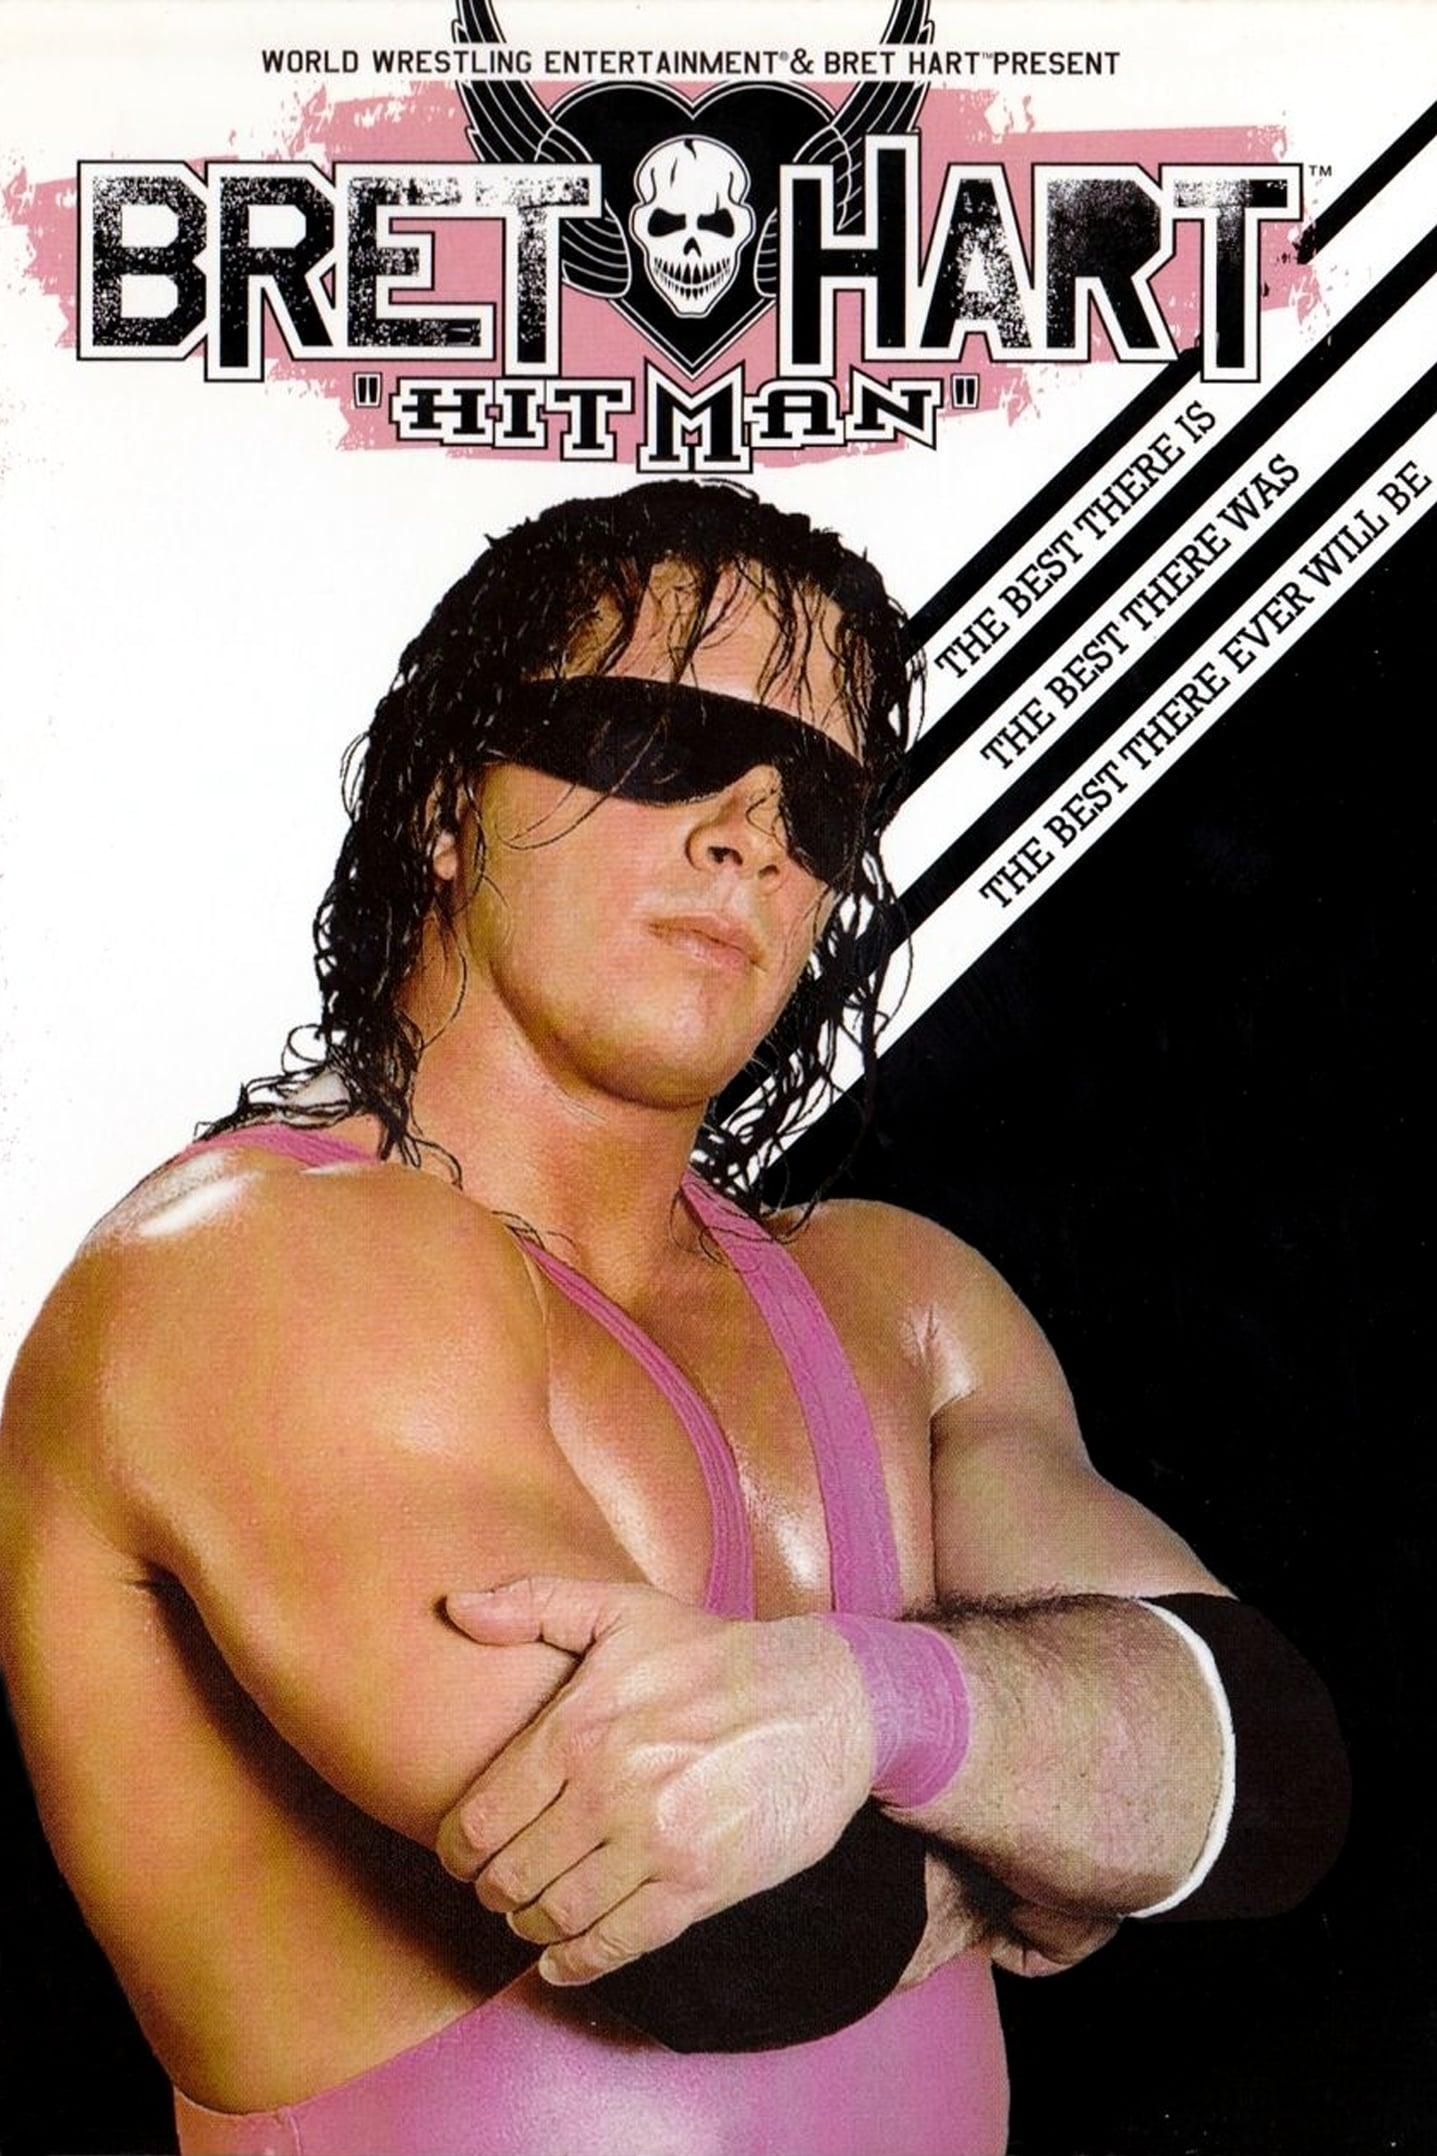 WWE: Bret 'Hitman' Hart - The Best There Is, The Best There Was, The Best There Ever Will Be poster